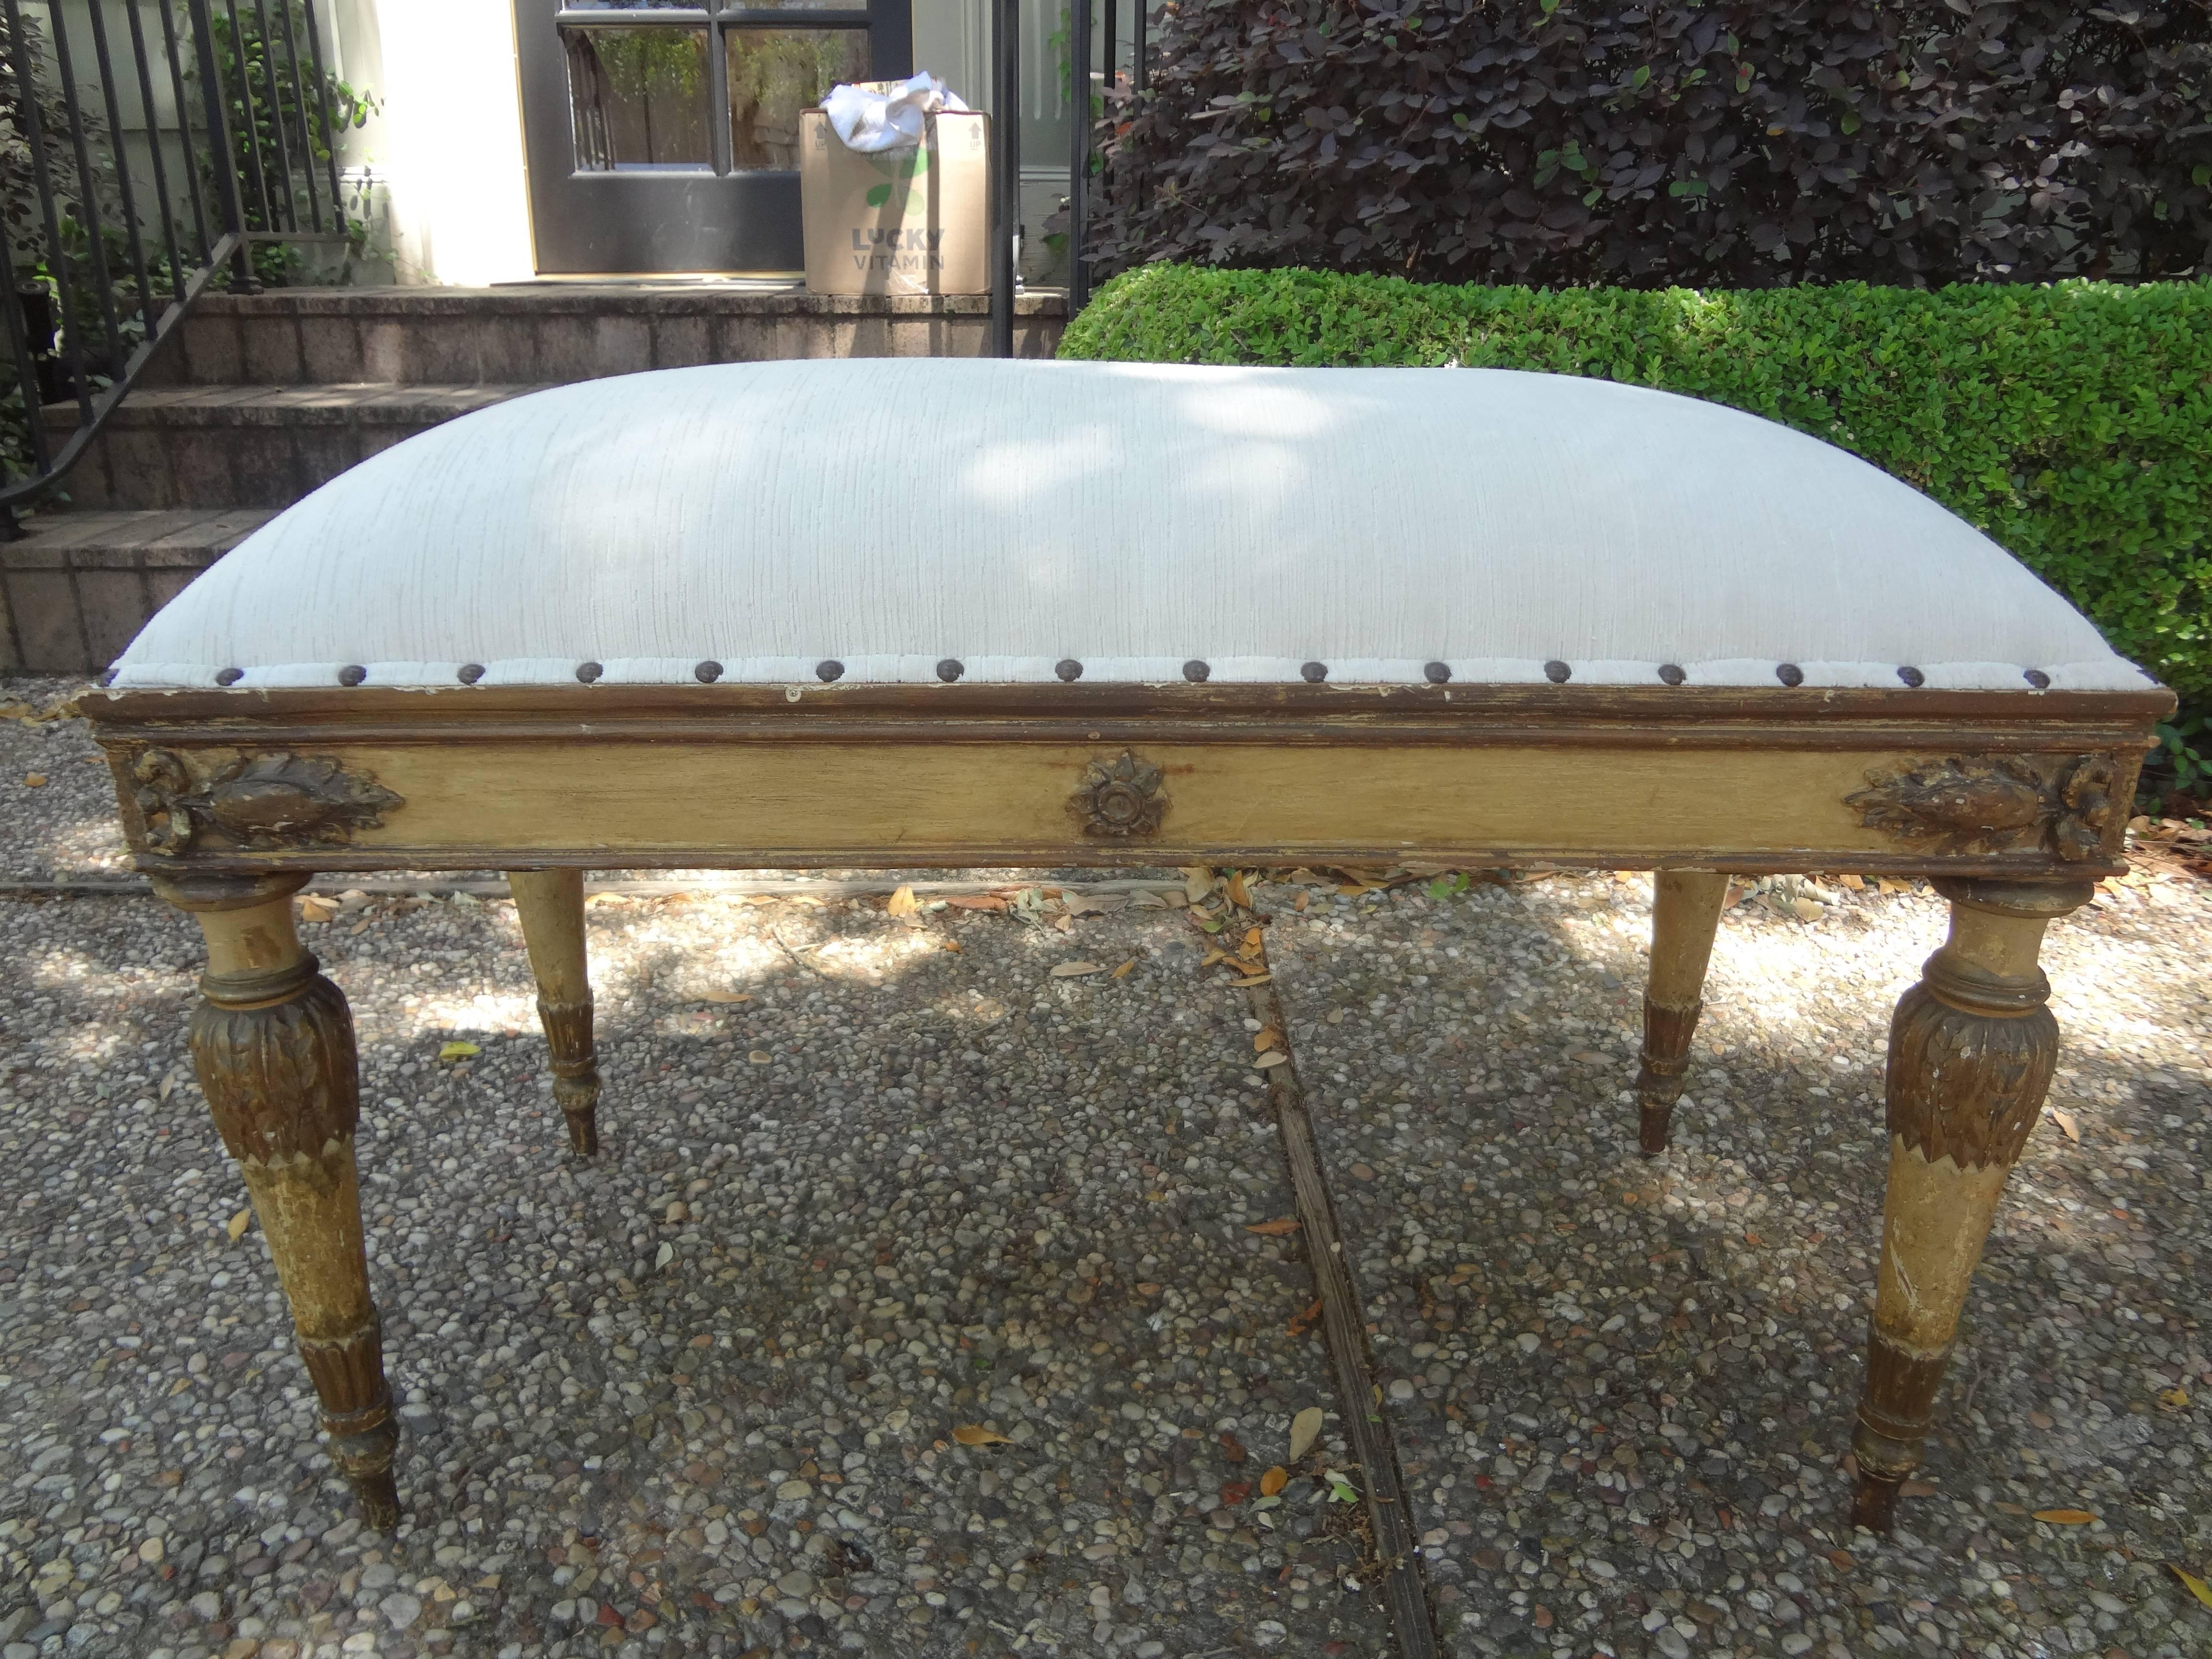 Stunning Italian Neoclassical style painted and gilt bench. This Italian 1920s Directoire style bench was taken down to the frame and professionally upholstered with cream striated cut velvet and spaced brass nail head detail. Our versatile Italian